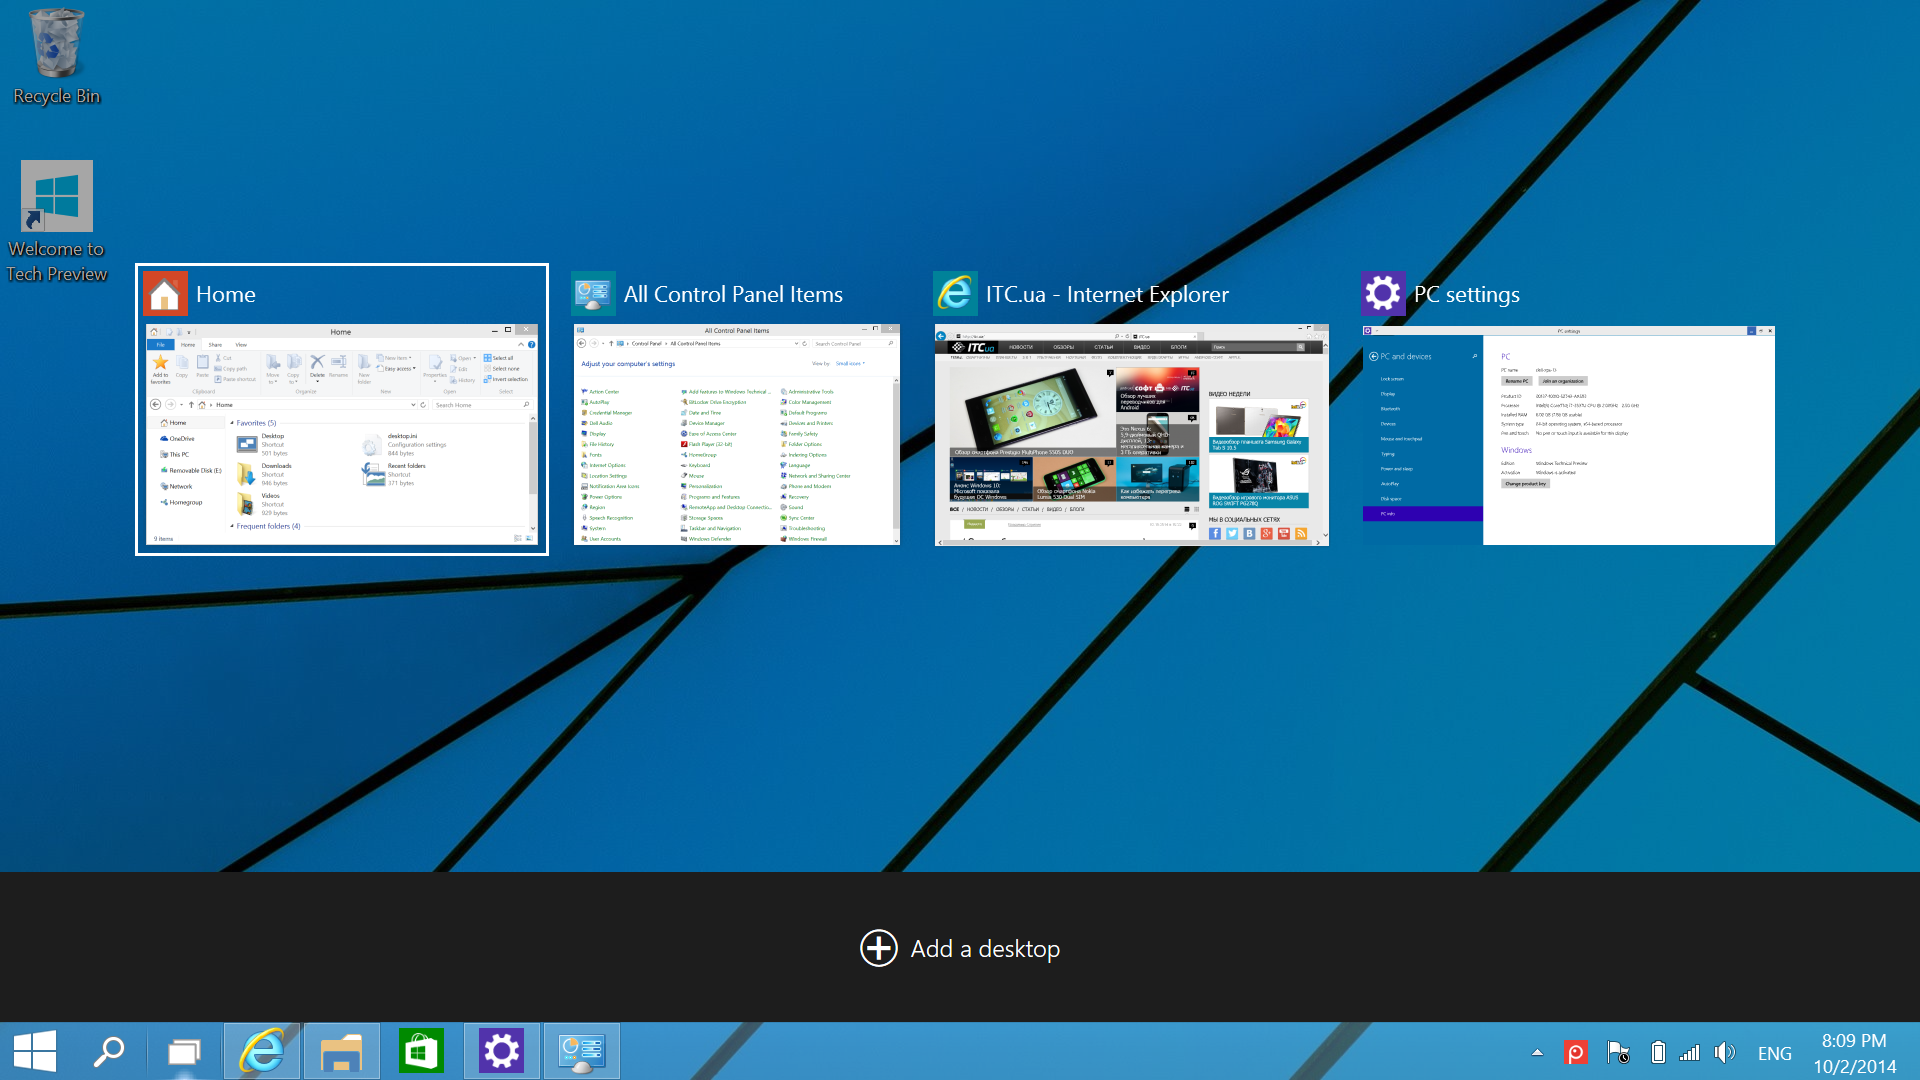 User guide to Windows 10 | Network World